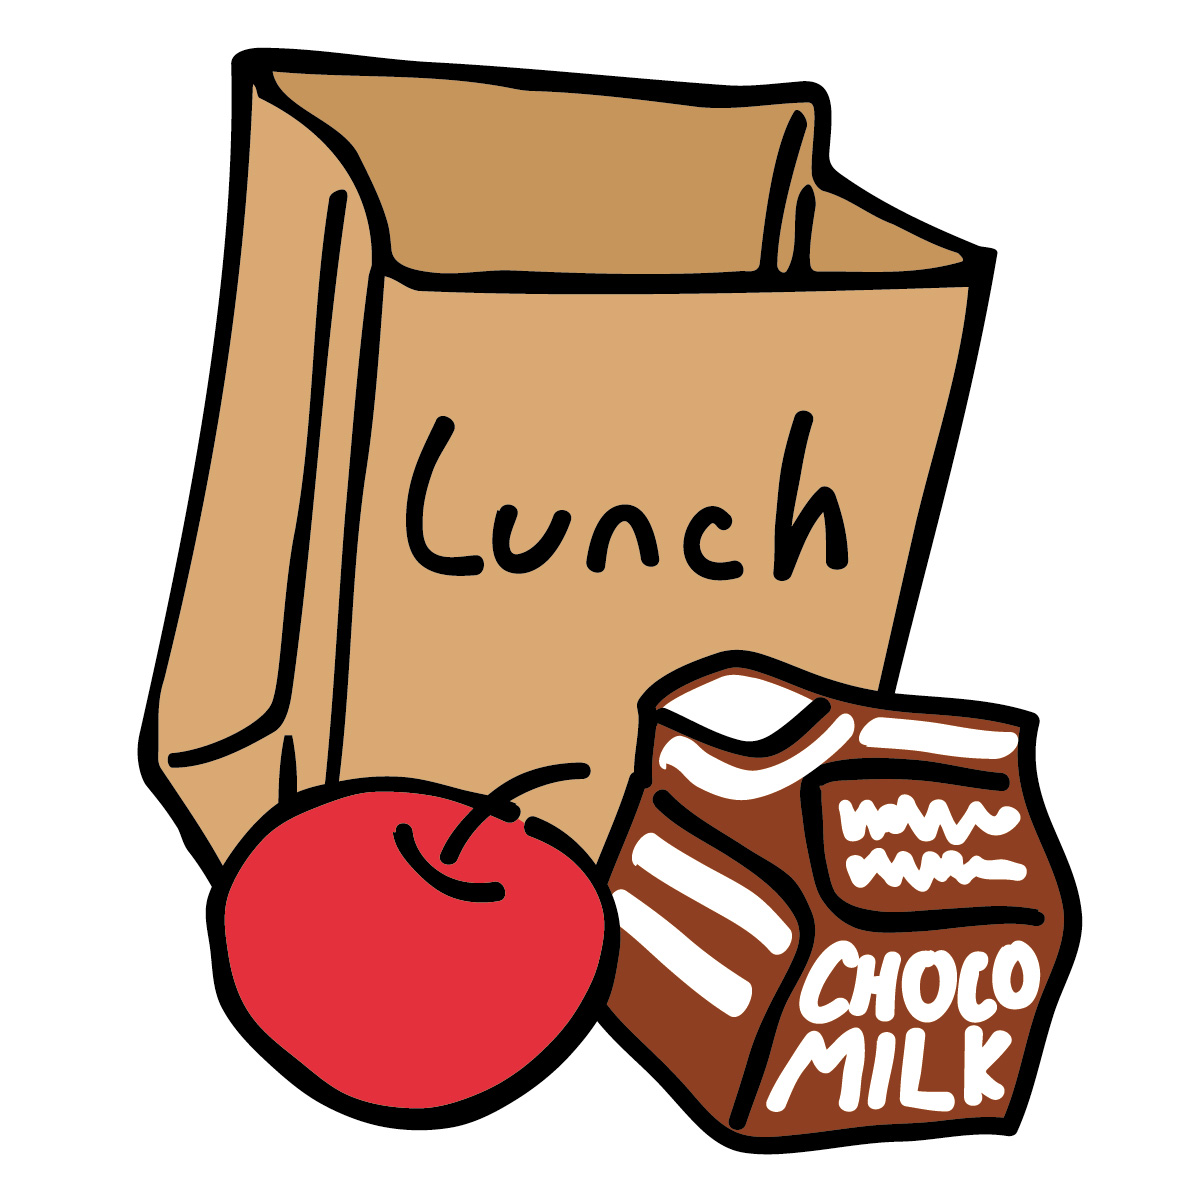 kids eating healthy clipart